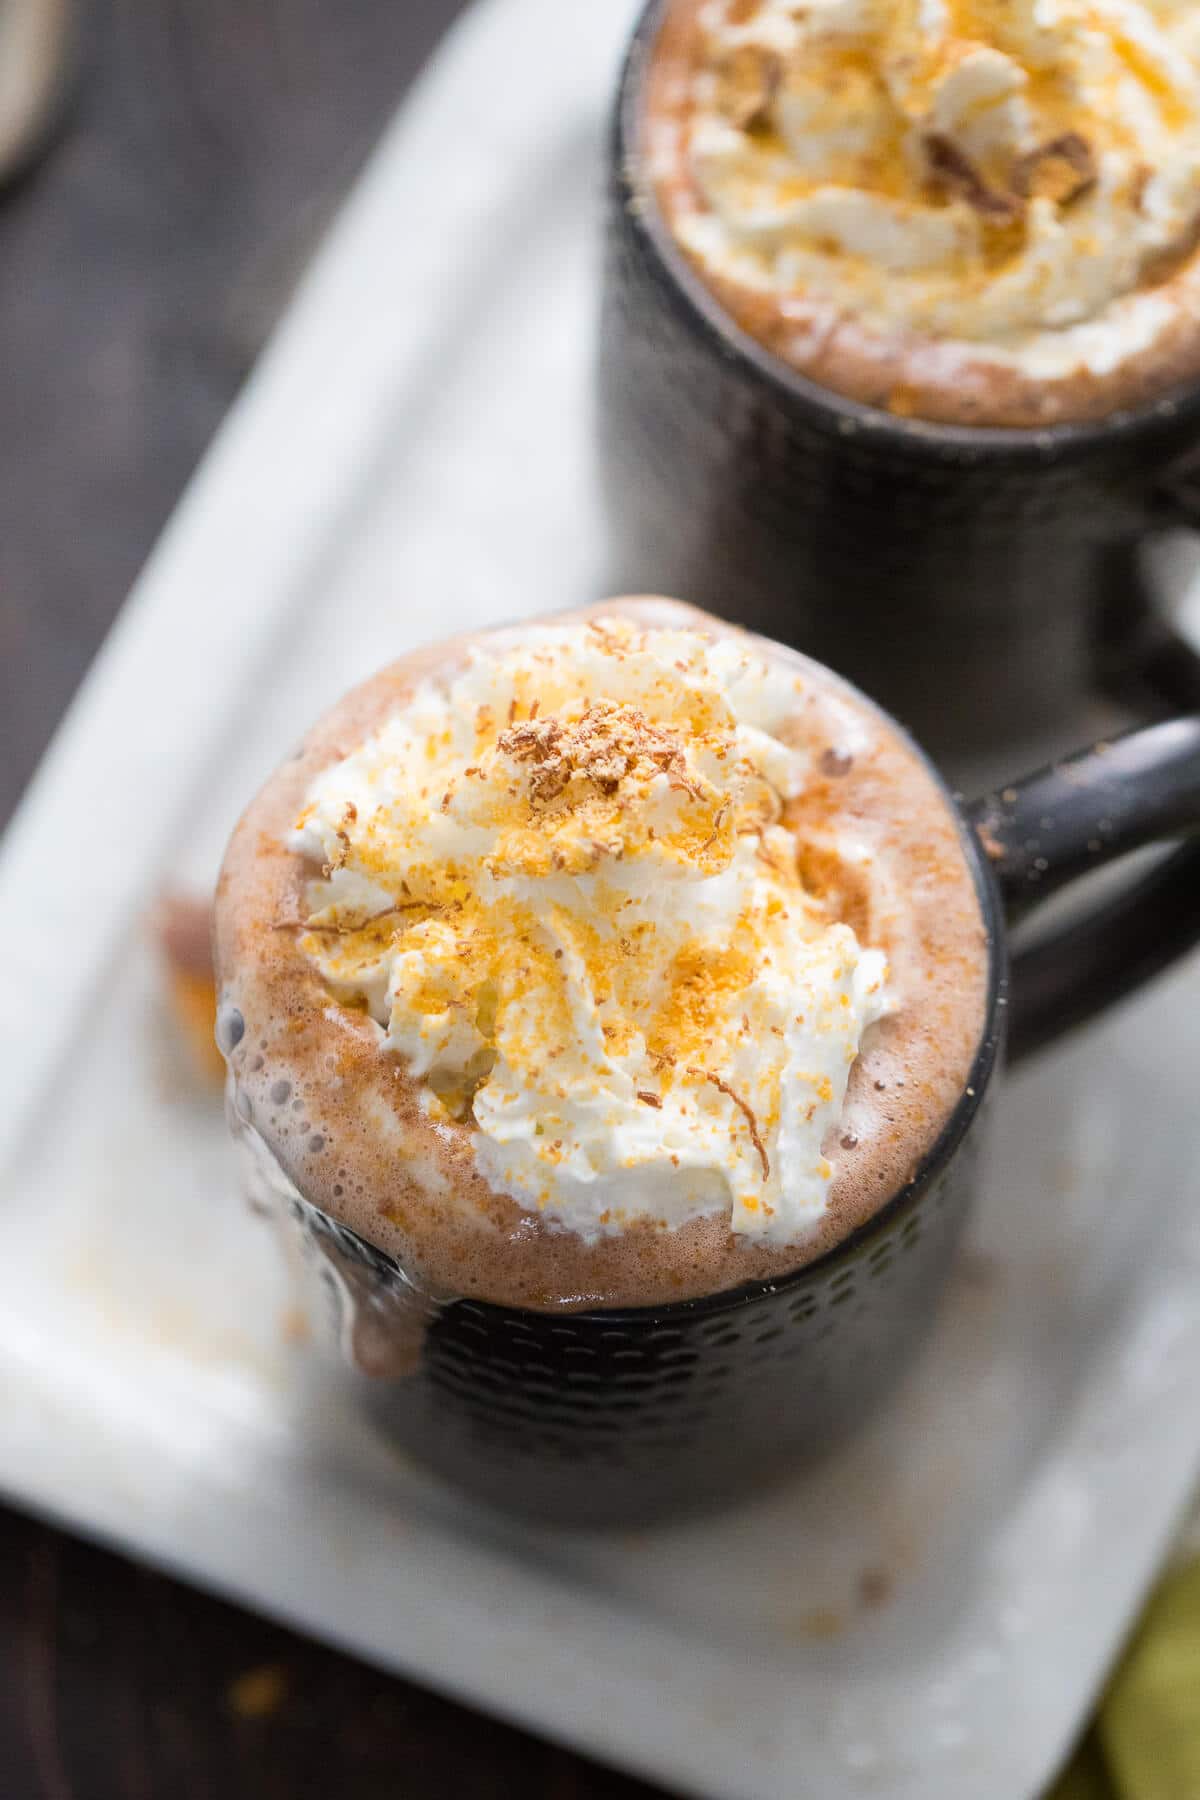 This hot cocoa recipe tastes just like a Butterfinger candy! It so rich a delicious!